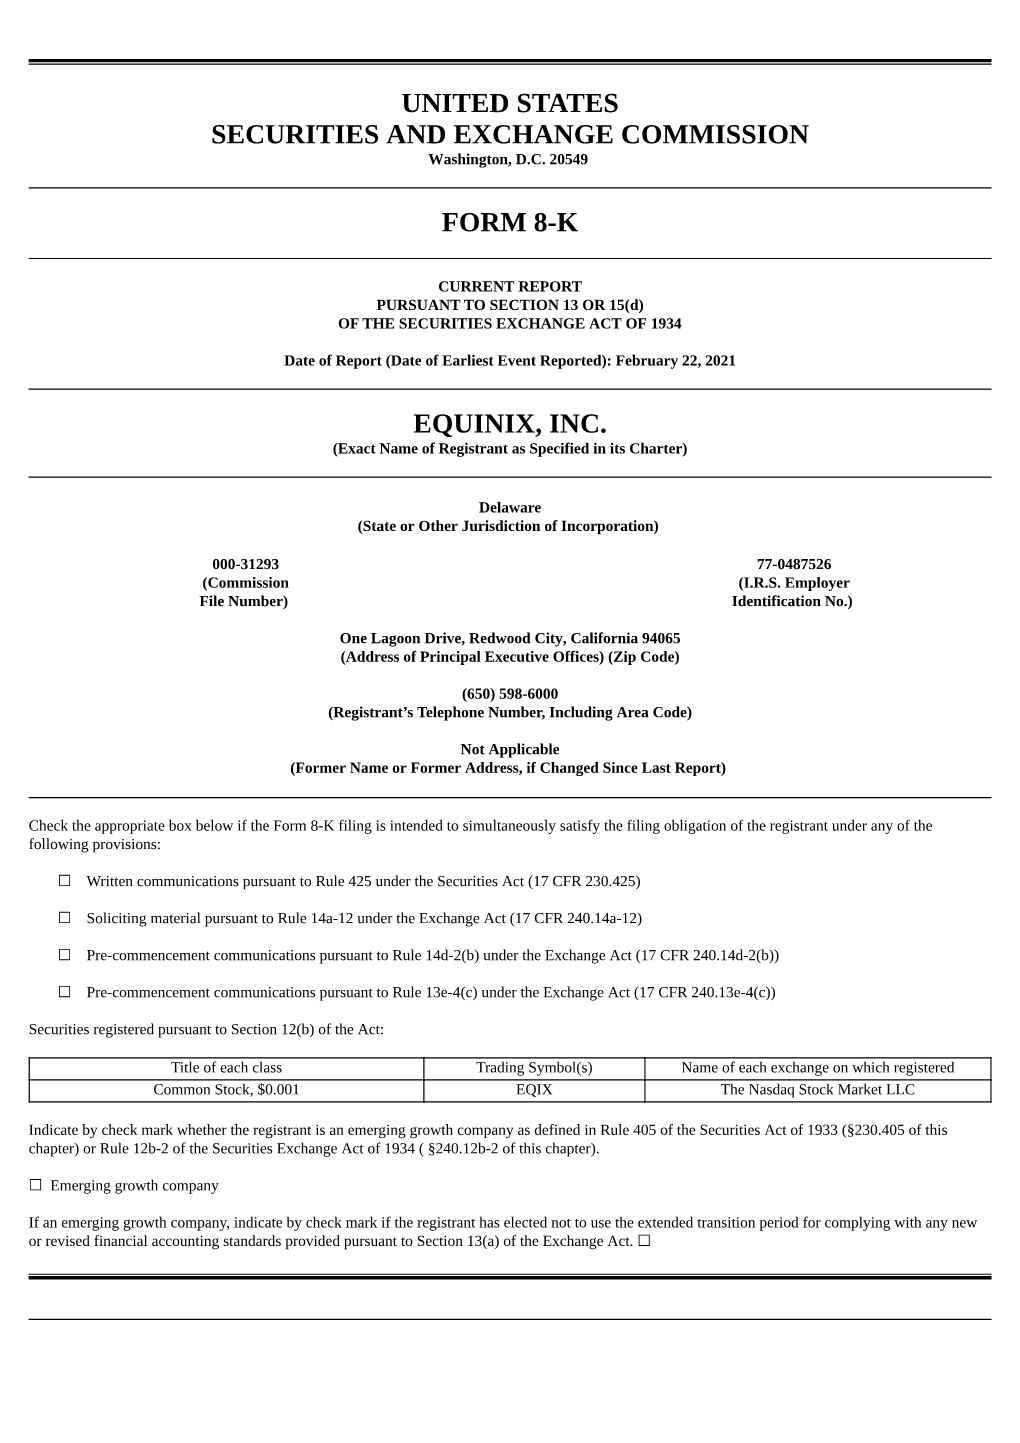 United States Securities and Exchange Commission Form 8-K Equinix, Inc